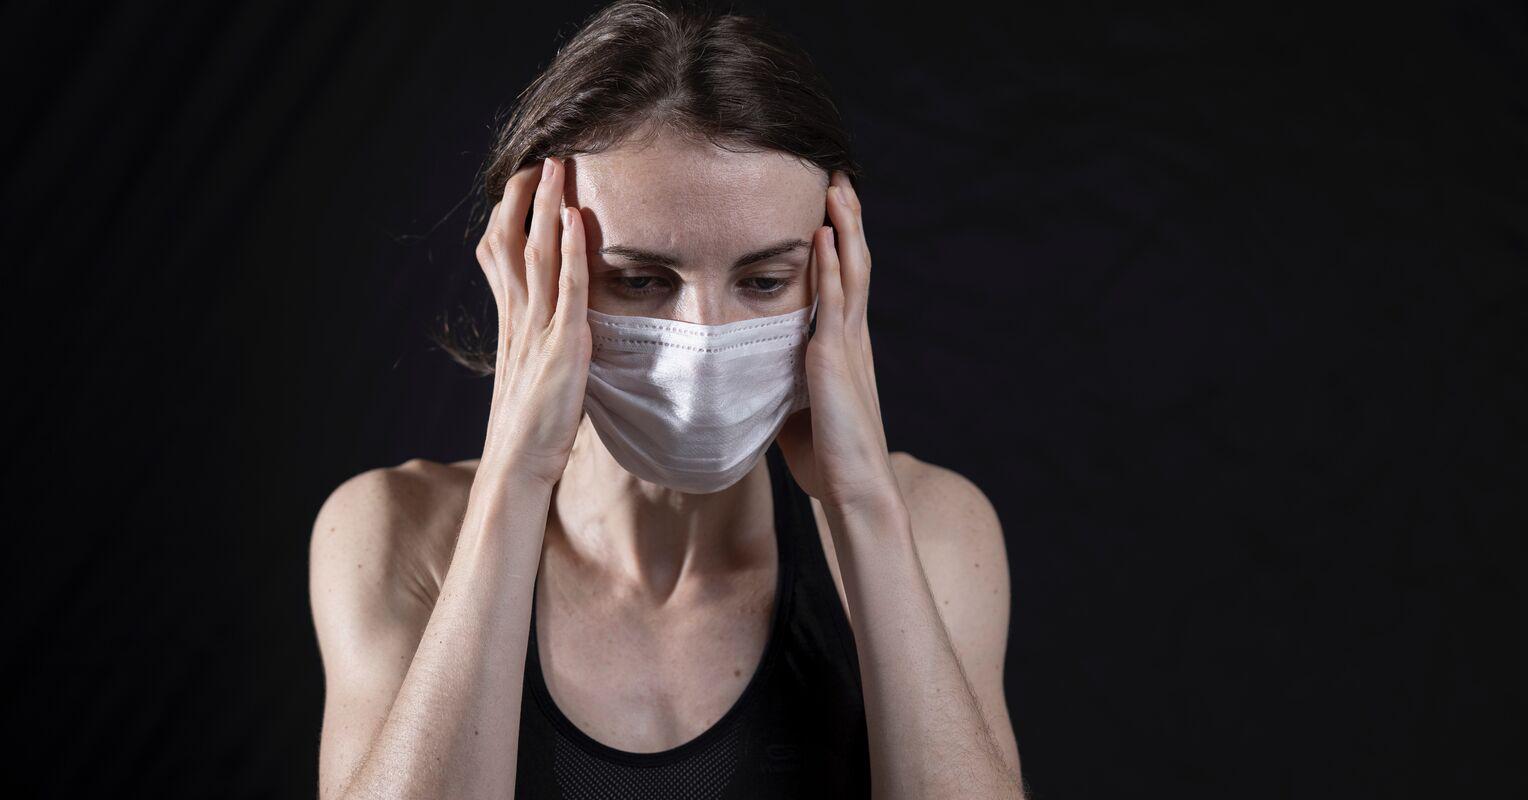 Managing Health Anxiety During a Pandemic